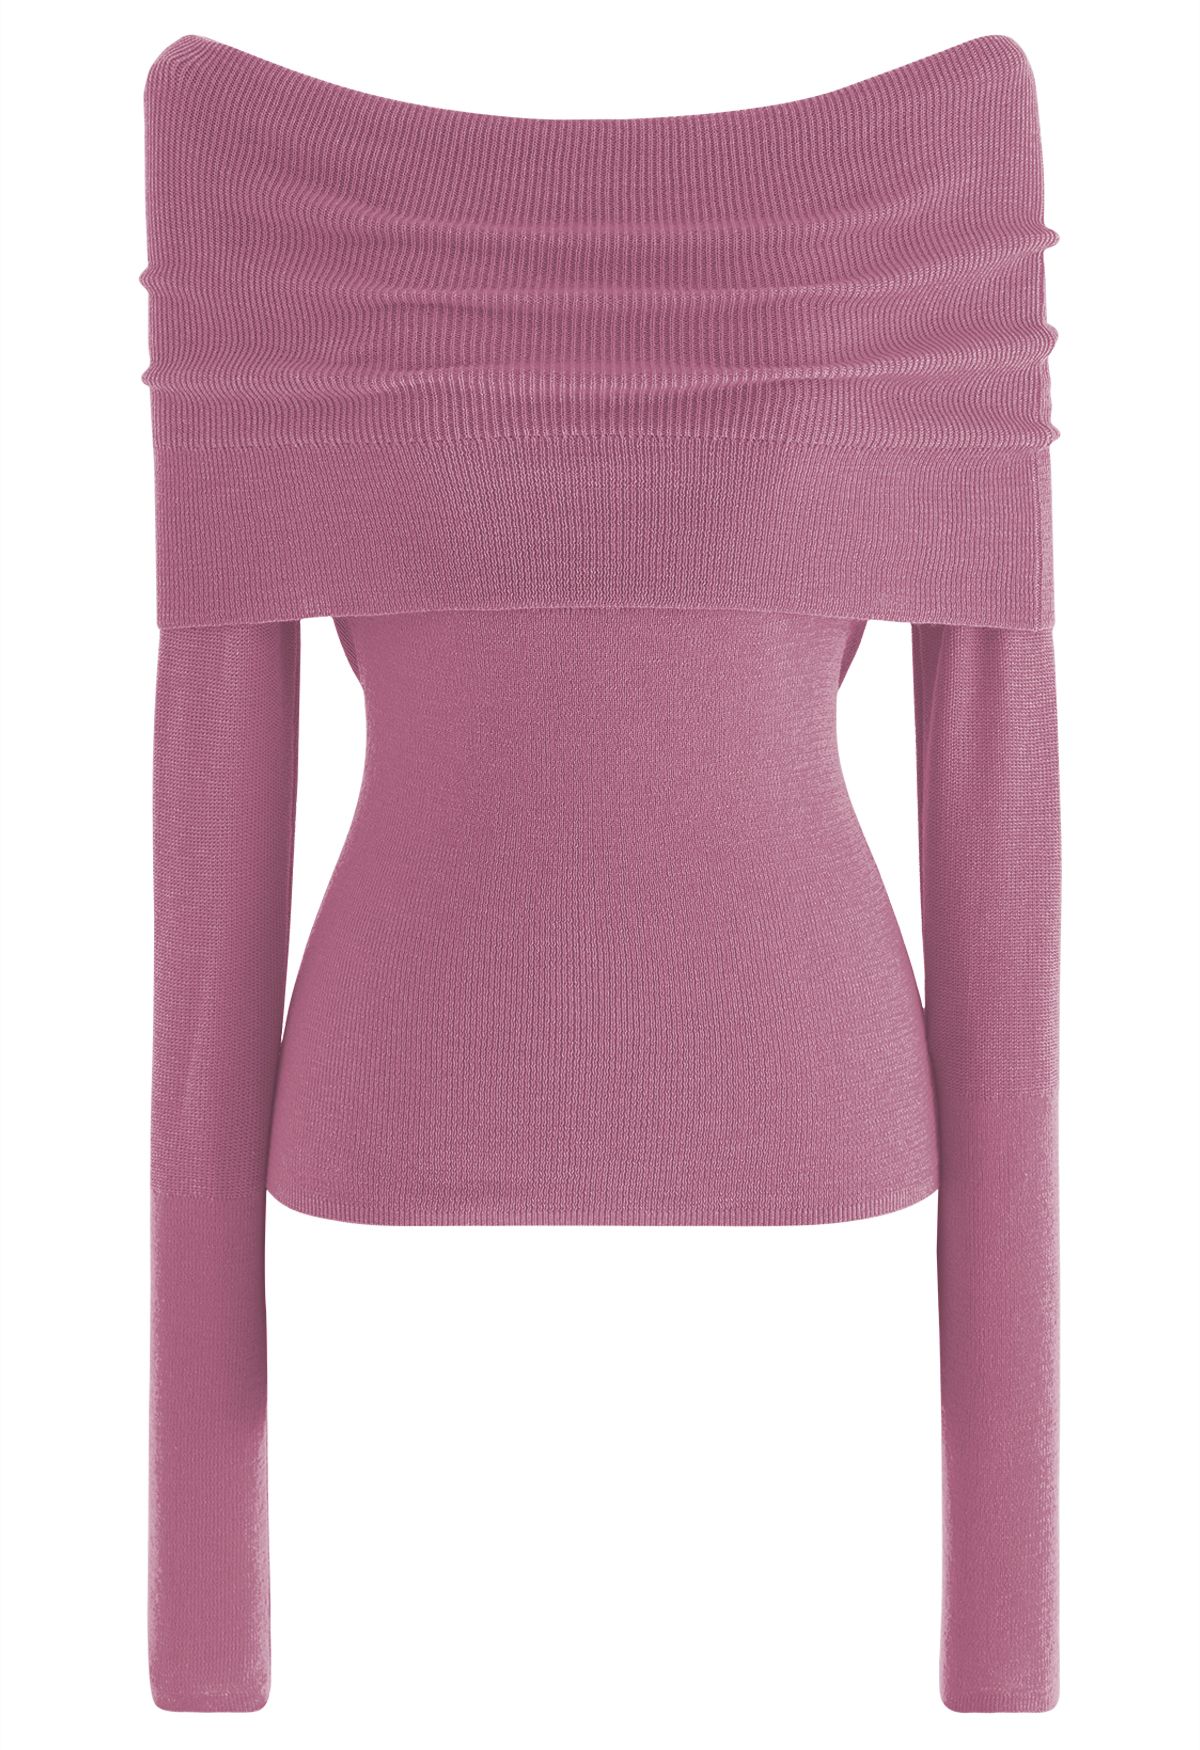 Petite Pink Knitted Fold Over Top, Petite